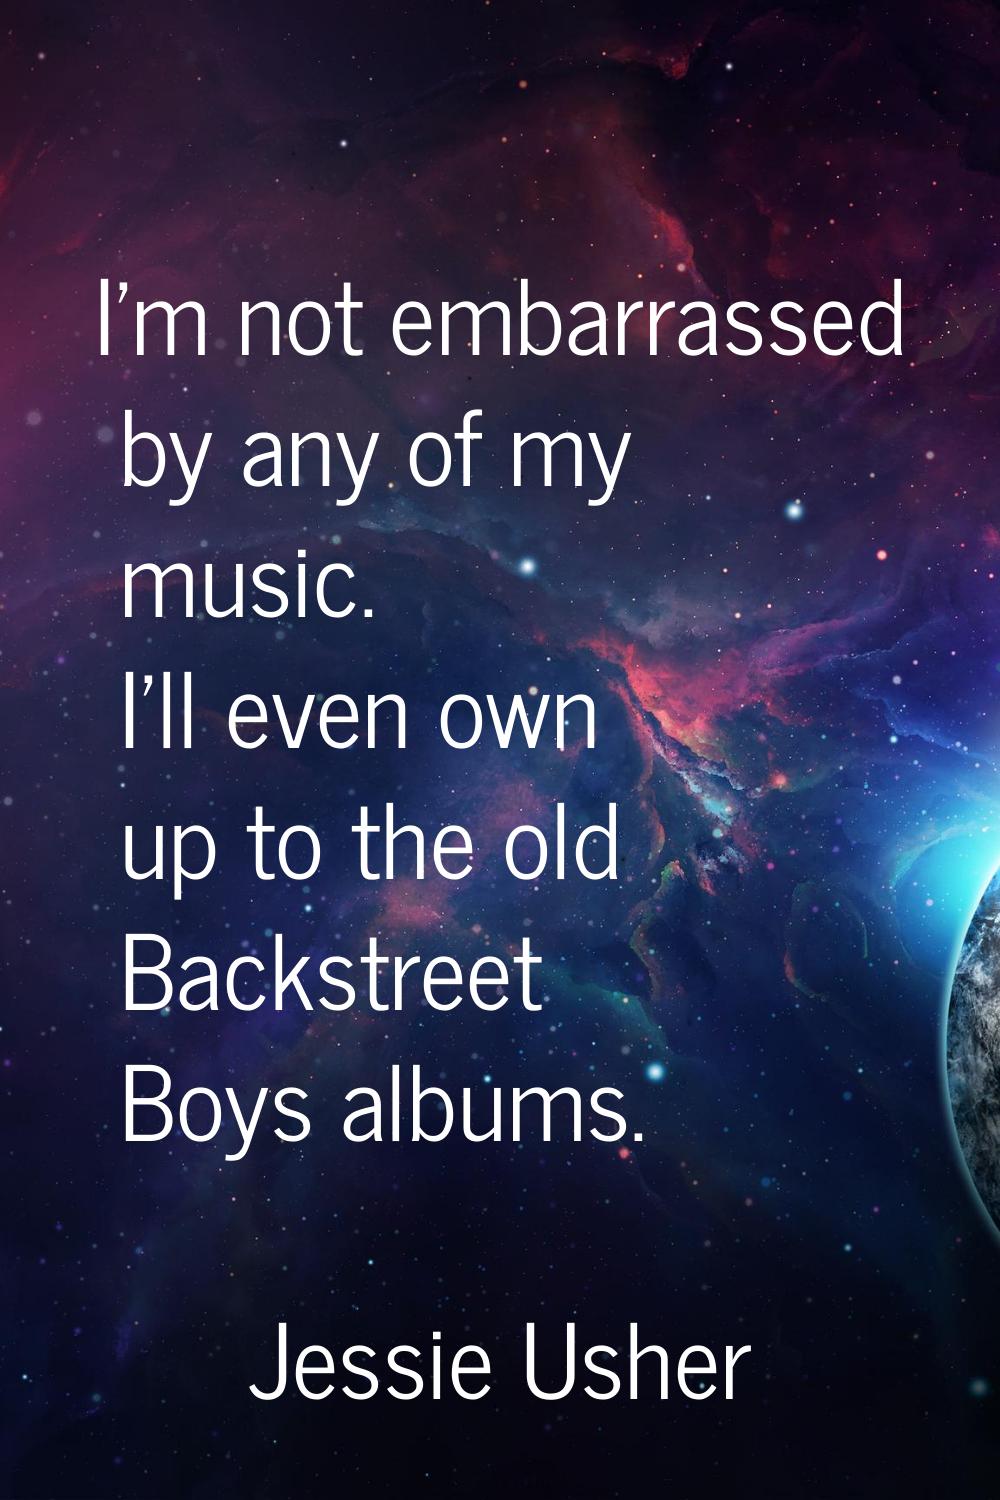 I'm not embarrassed by any of my music. I'll even own up to the old Backstreet Boys albums.